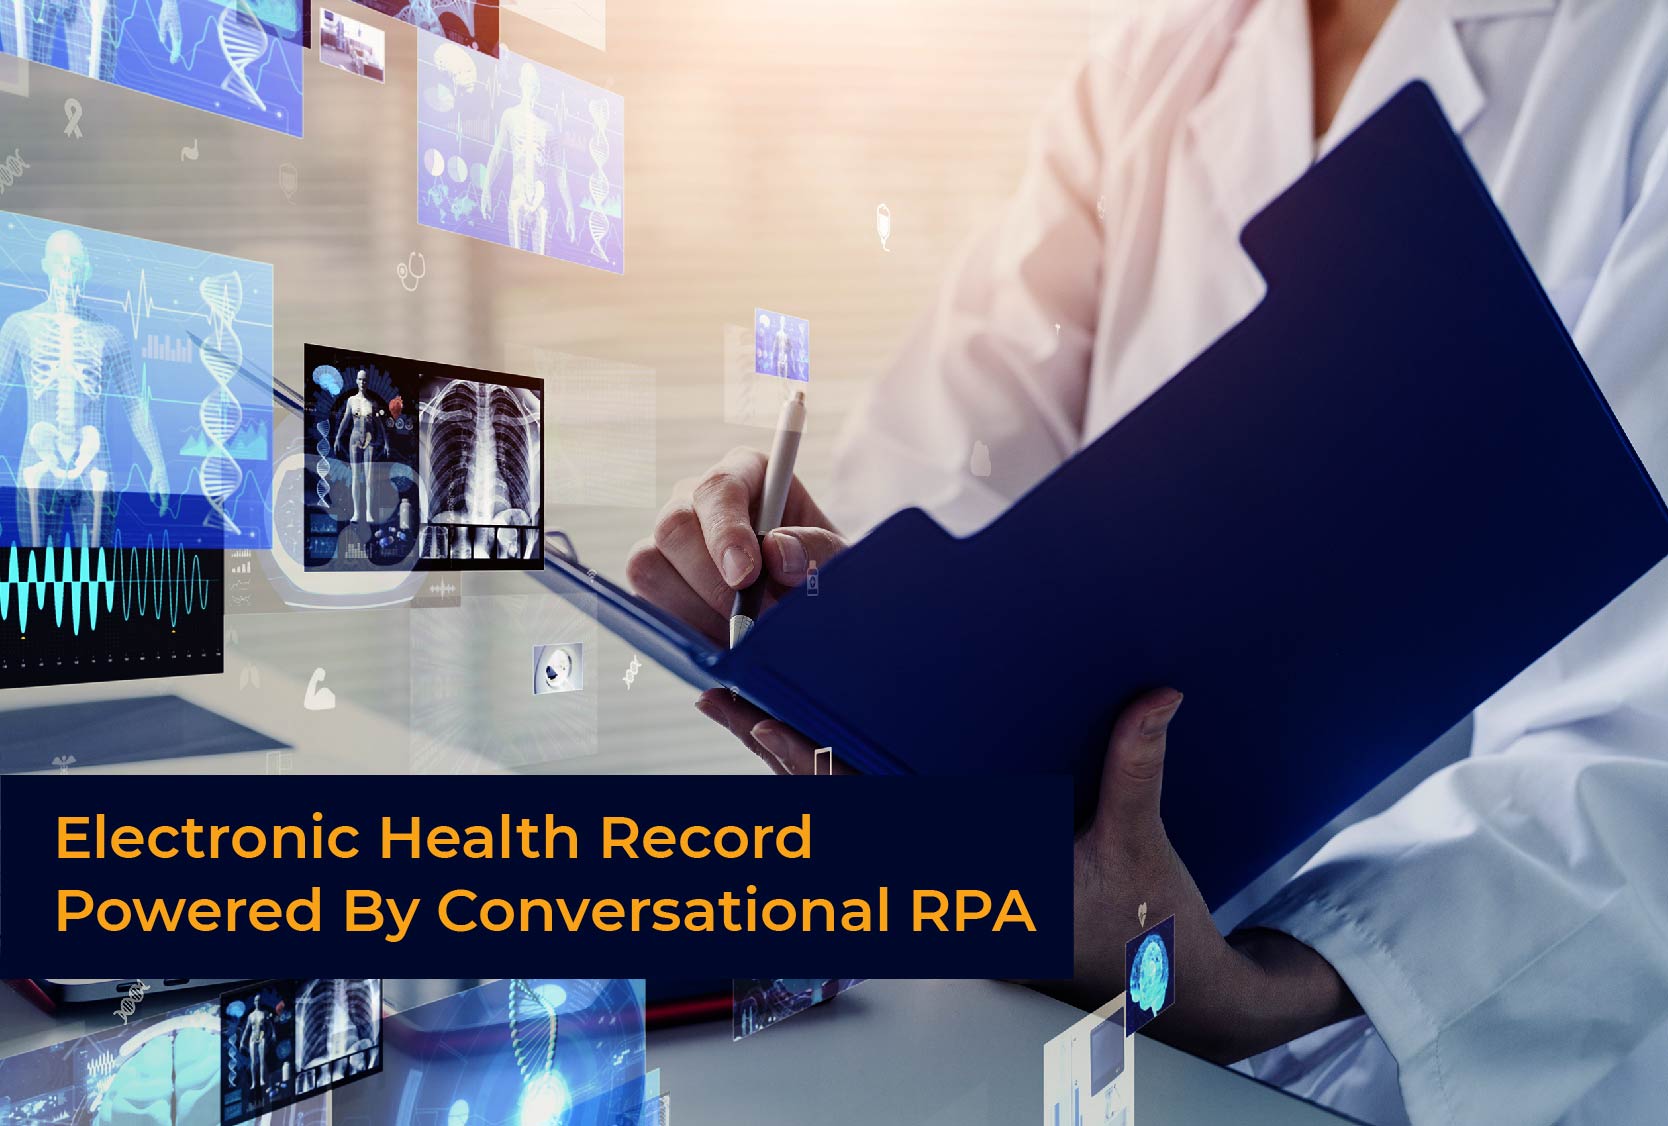 Future is bright with Conversational RPA And AI in Electronic Health Records(EHR)